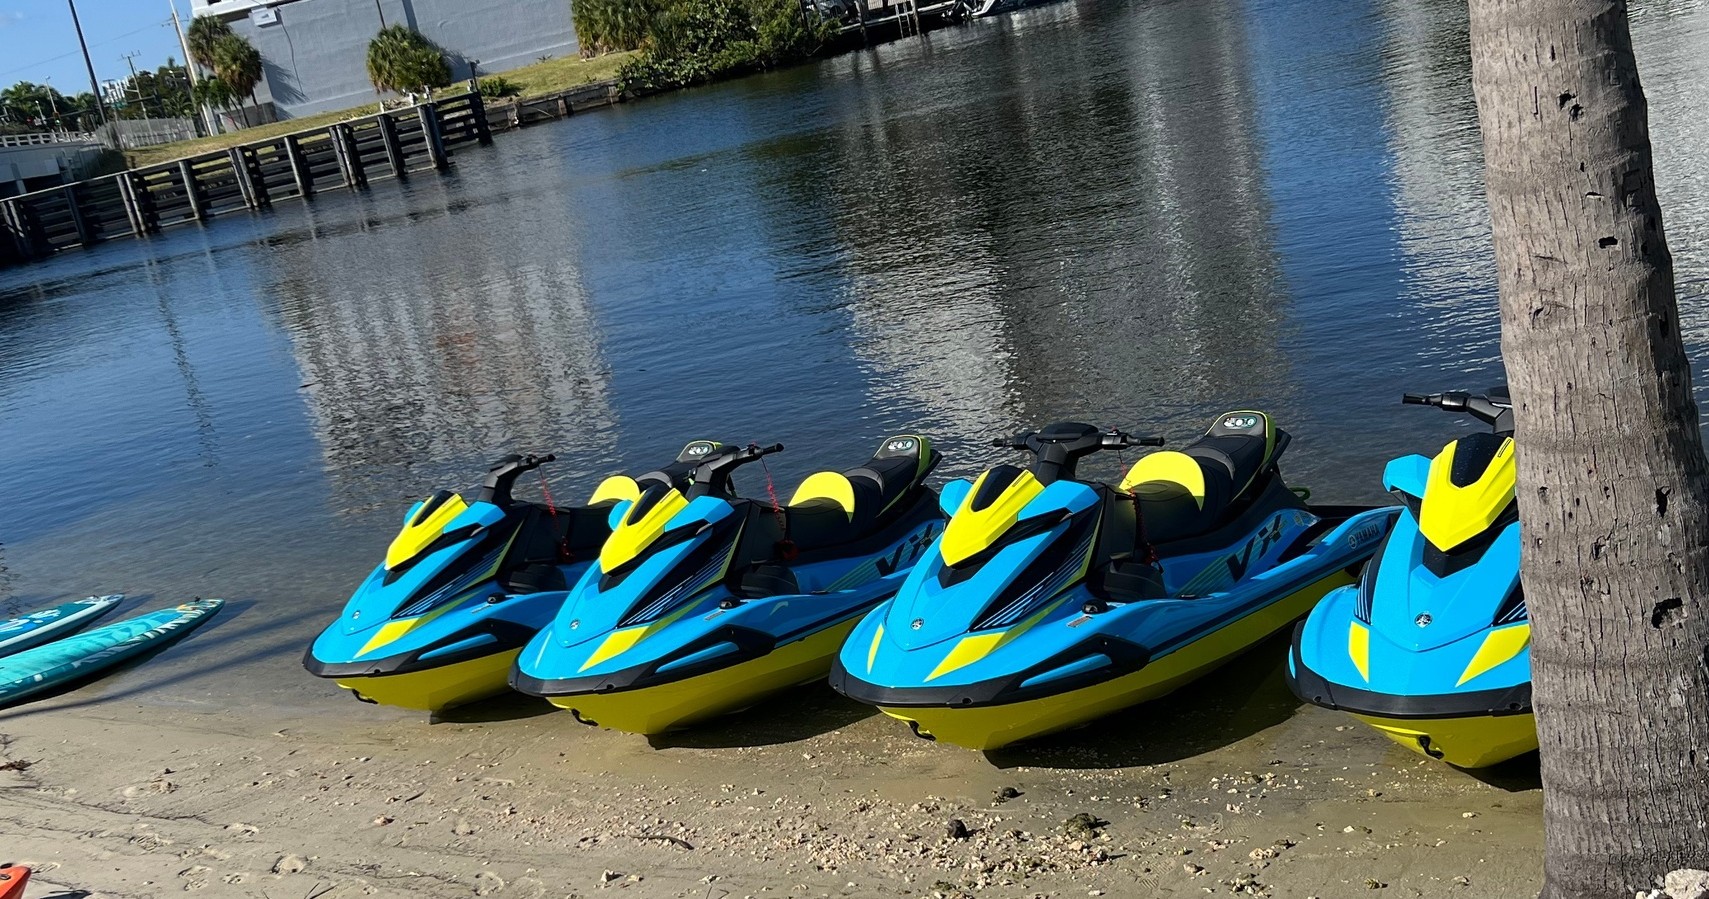 Thumbnail image for Jet Ski Guided Rental Through George English Park in Fort Lauderdale